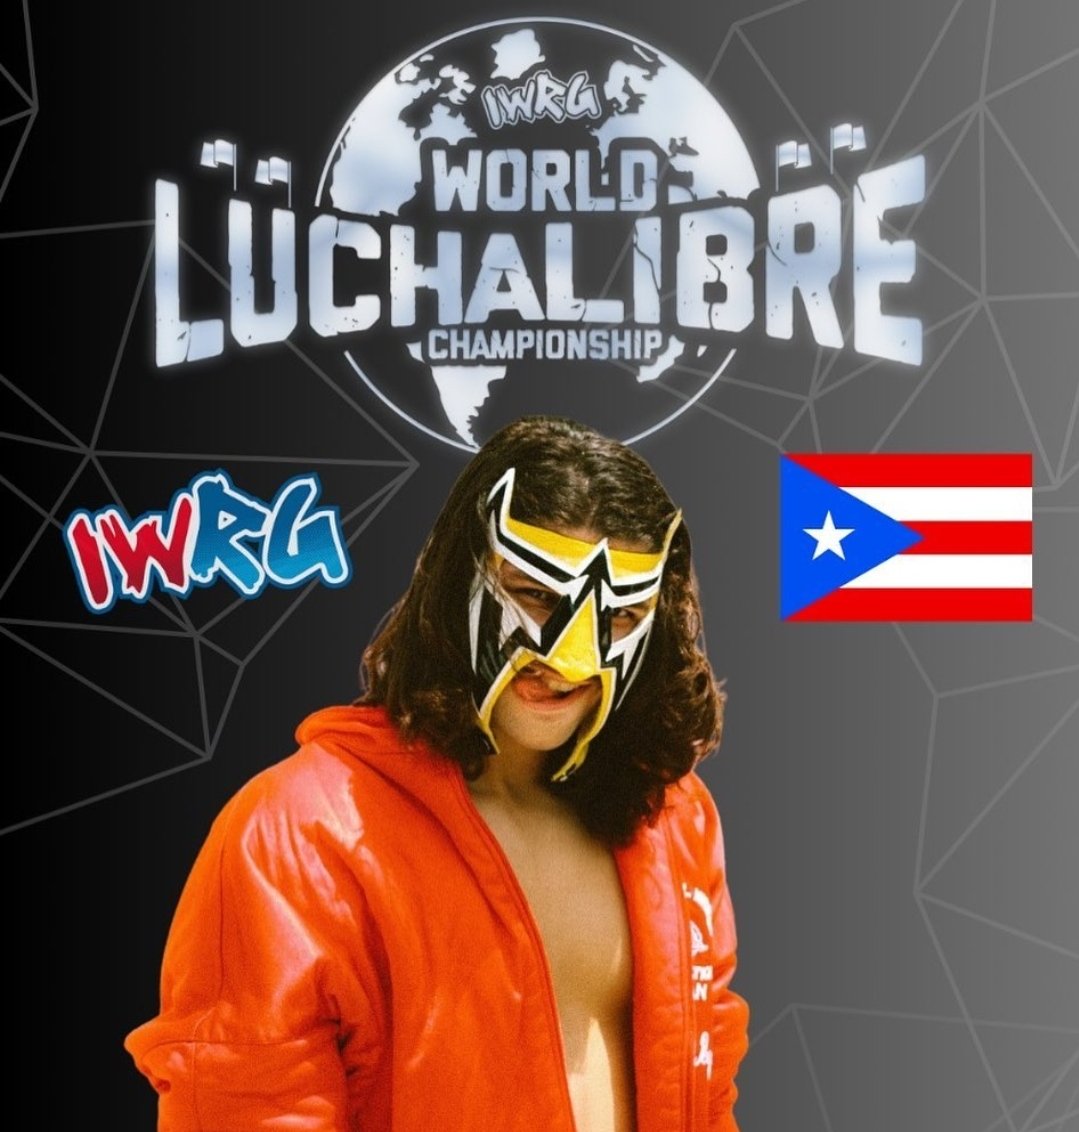 🍿Hijo del Enigma🇵🇷 will compete for the Maximum Figure of International Wrestling in the World Lucha Libre Championship! 

IWRG
June 1st & 4th
Arena Naucalpan

#Iwrg #LuchaLibre #Wrestling #Championship